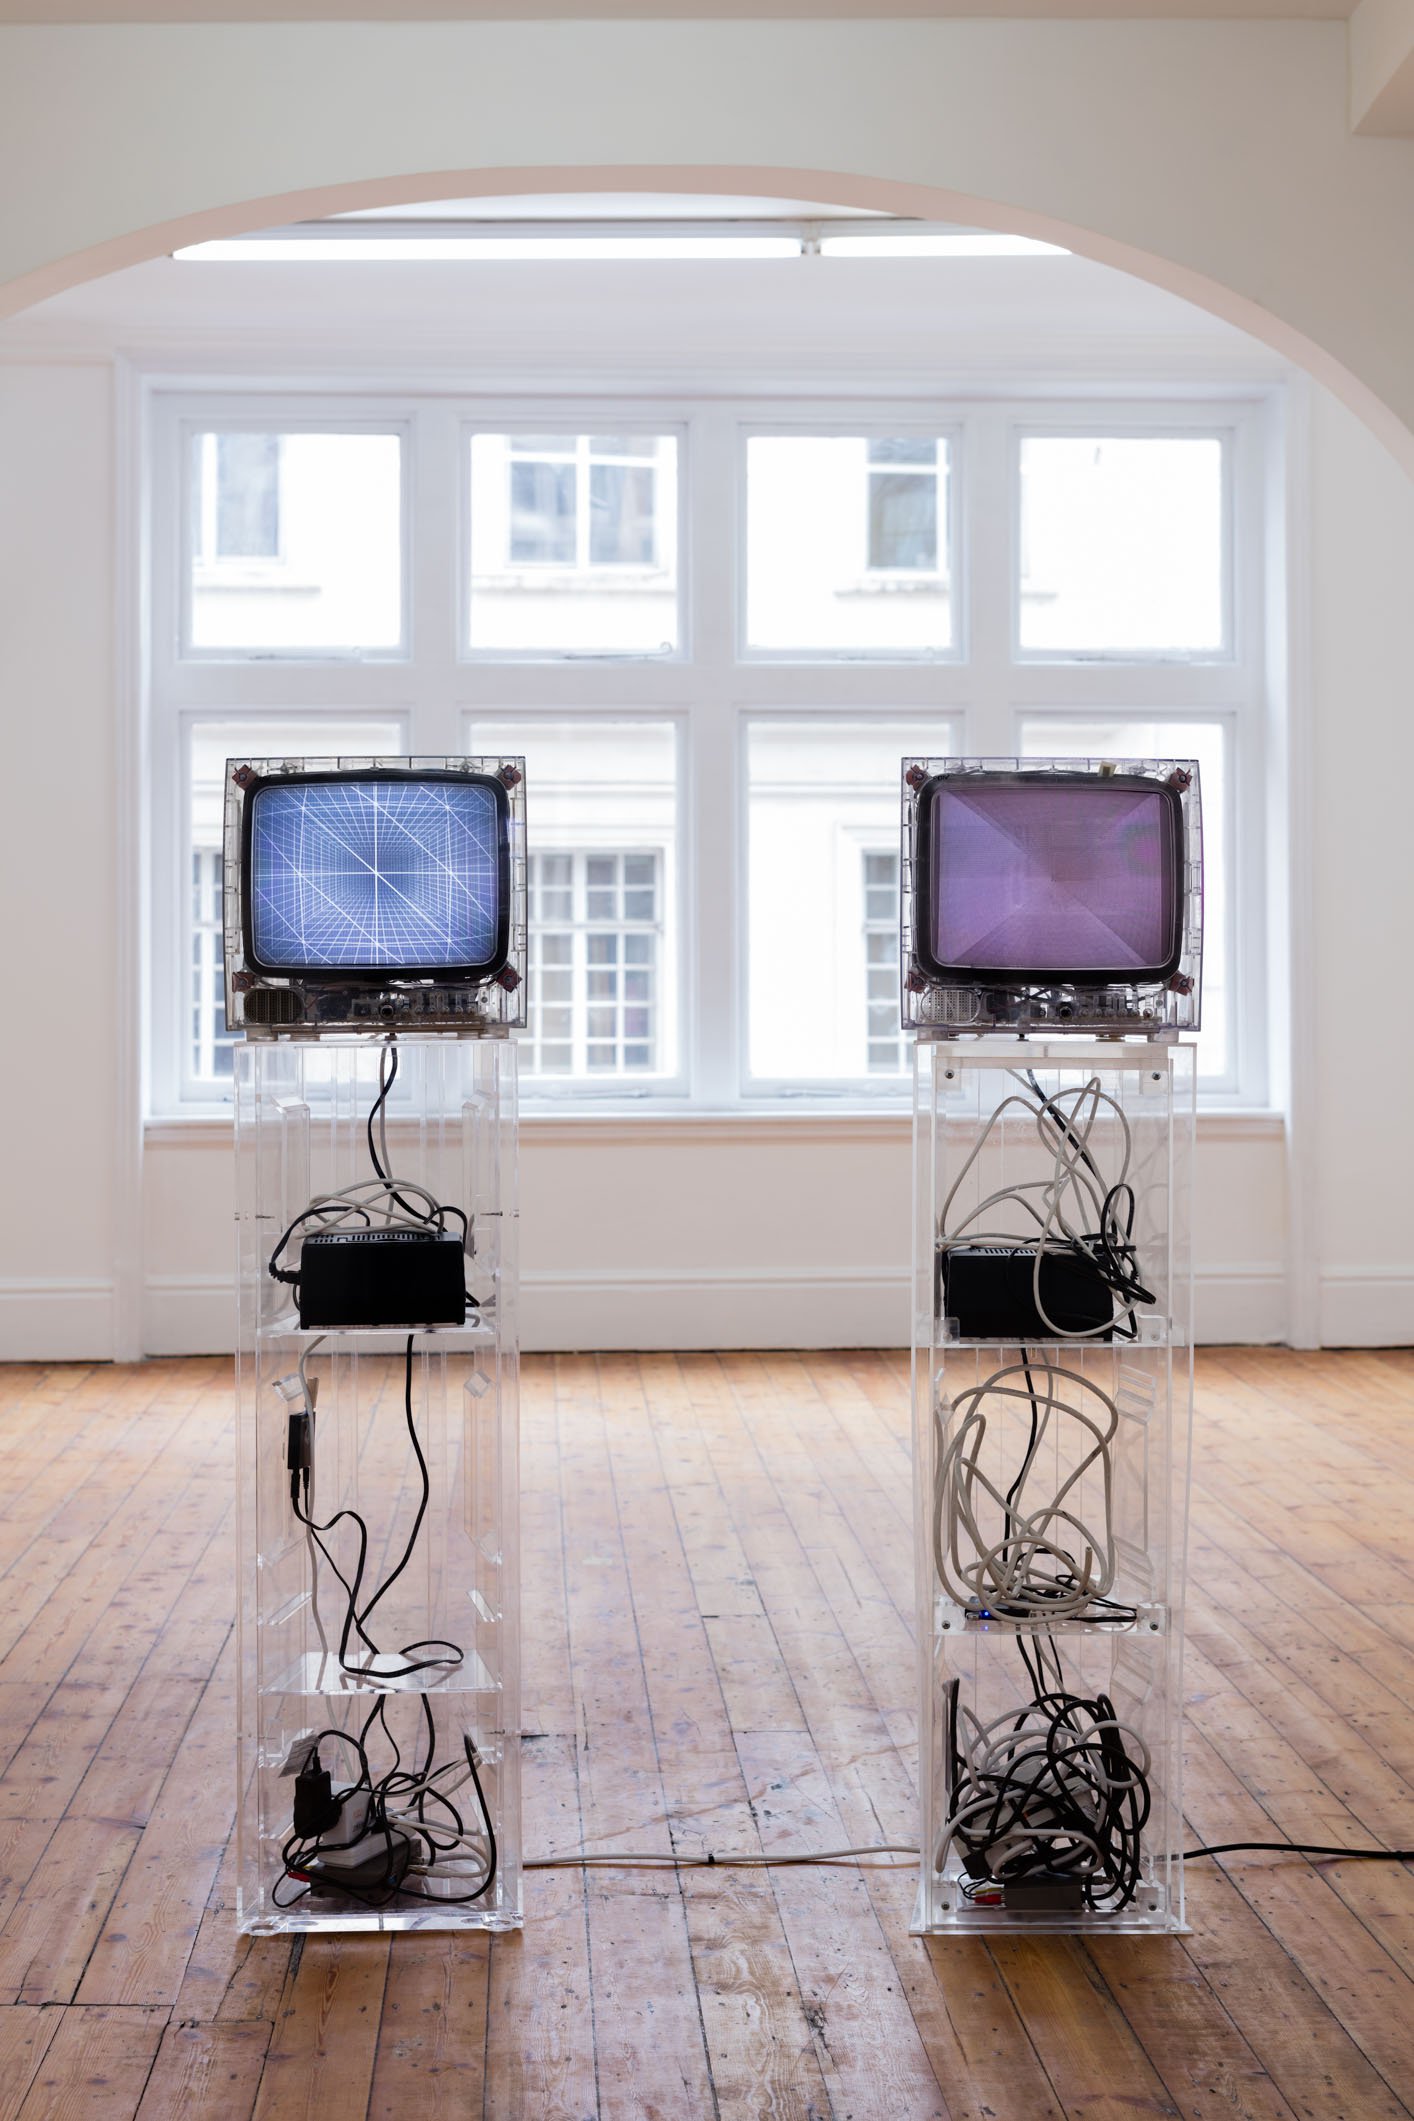 Eloise Hawser, Untitled, Cathode Ray Wyoming Prison TV’s 1996, animation, custom-built perspex electrical cabinets, transformer, modulator, media player, 2013